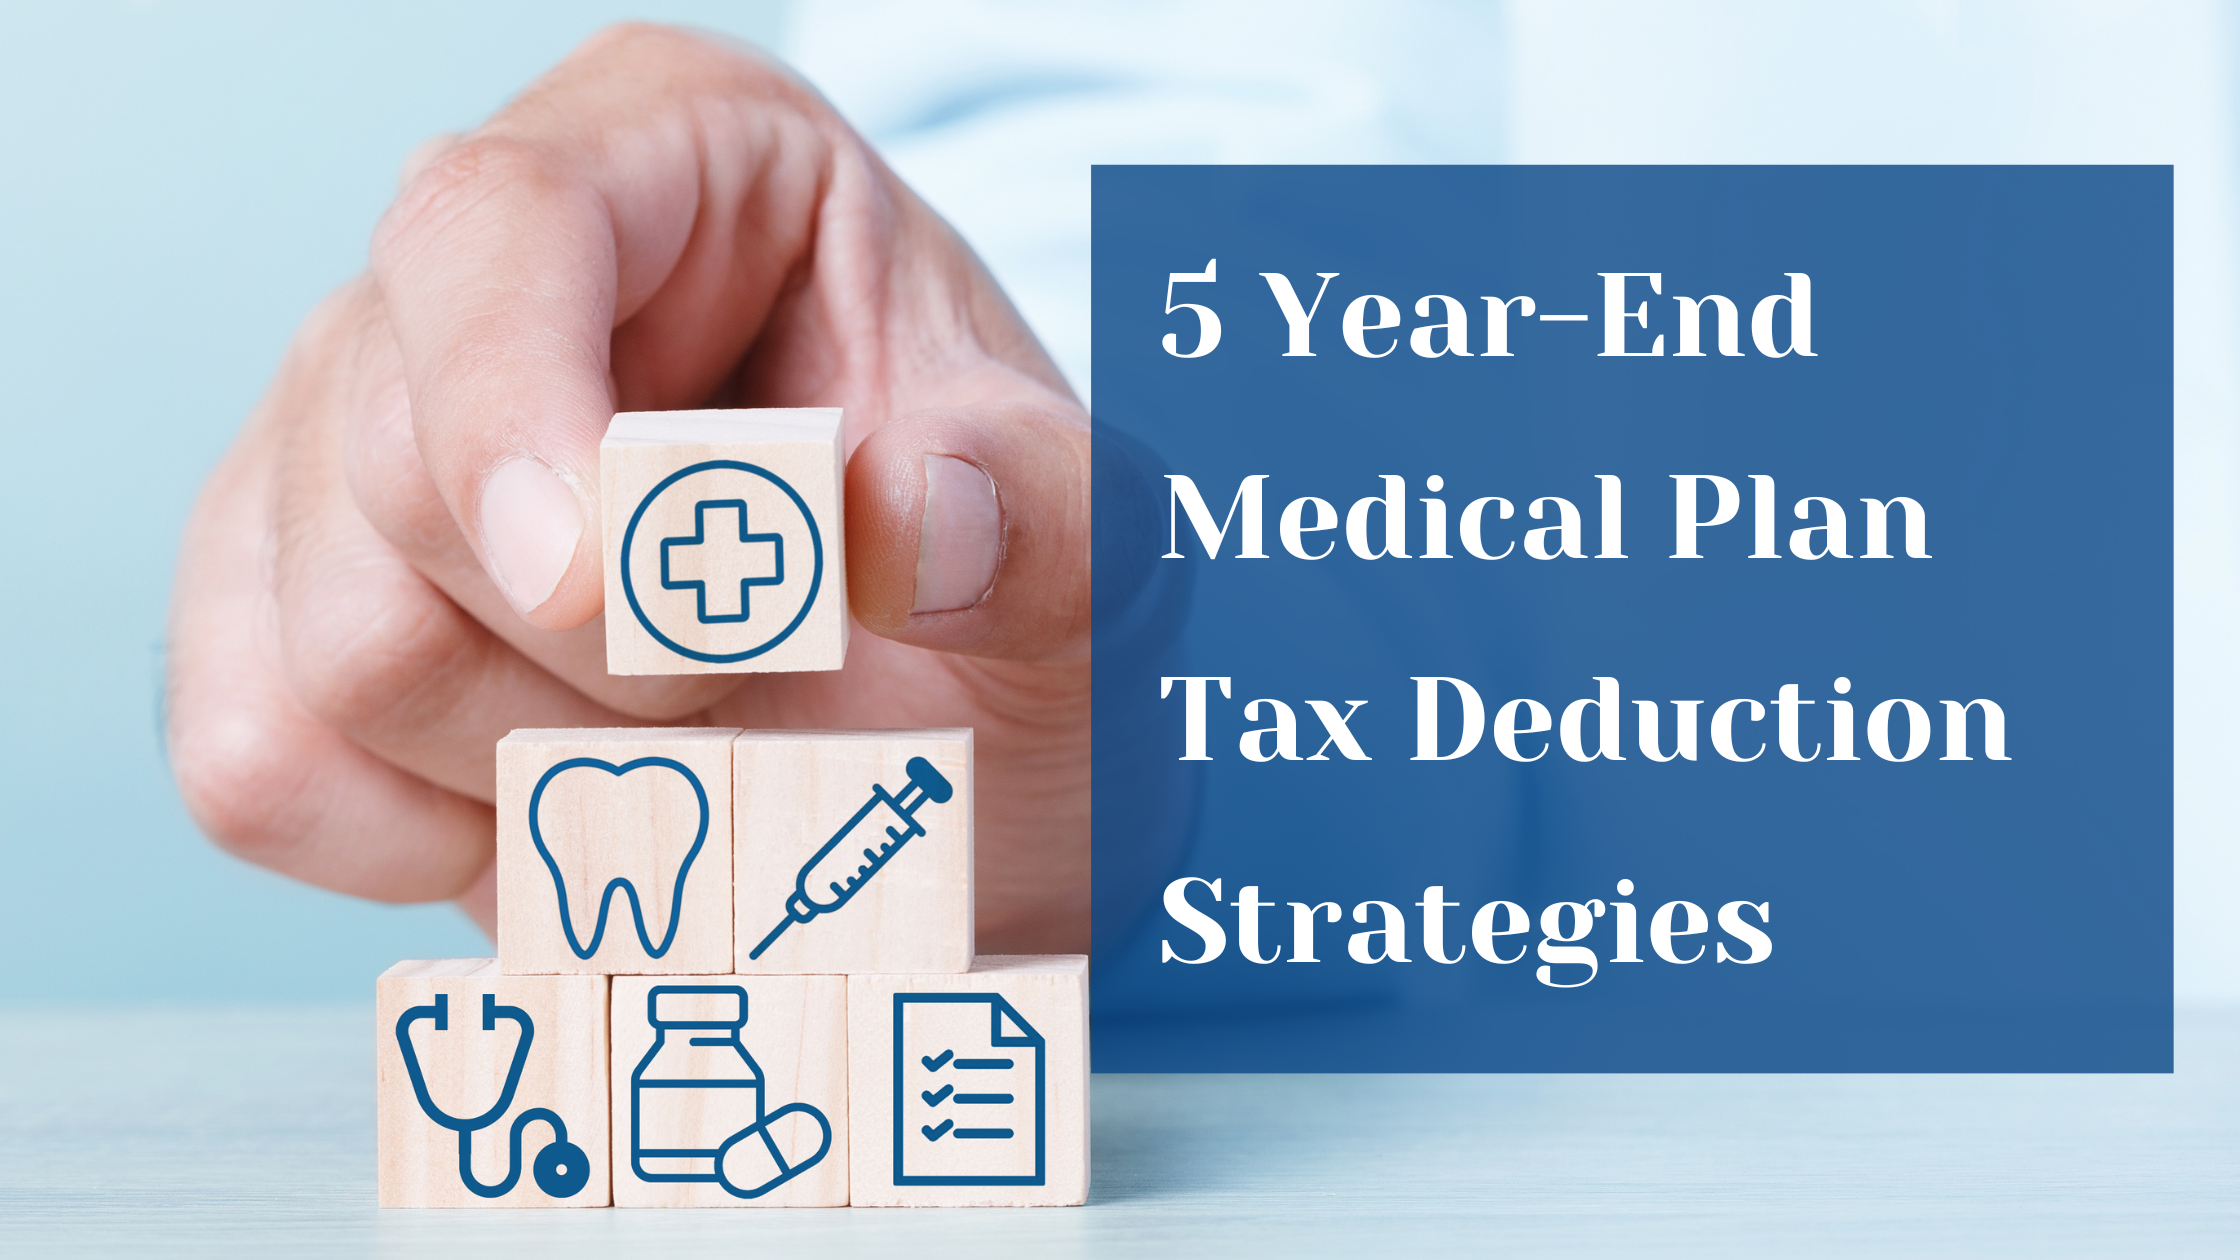 5 Year-End Medical Plan Tax Deduction Strategies for Insurance Agency Owners 